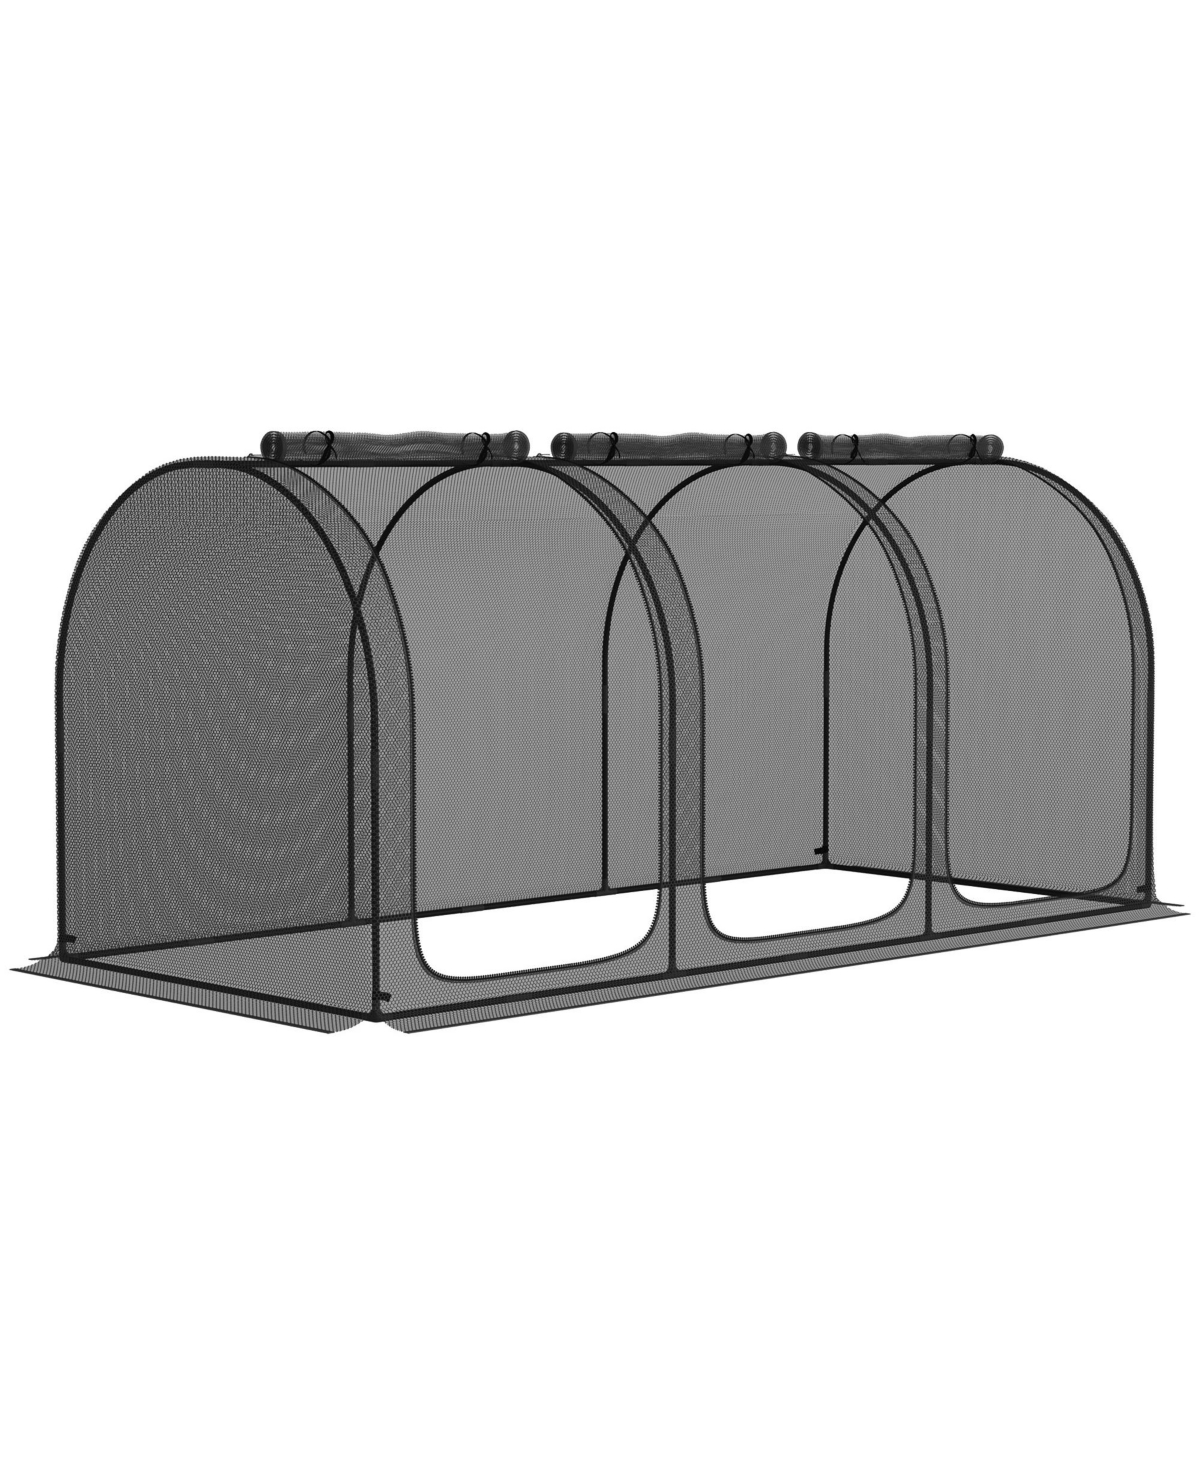 9' x 4' Crop Cage, Plant Protection Tent with Three Zippered Doors, Storage Bag and 6 Ground Stakes, for Garden, Yard, Lawn, Black - Black